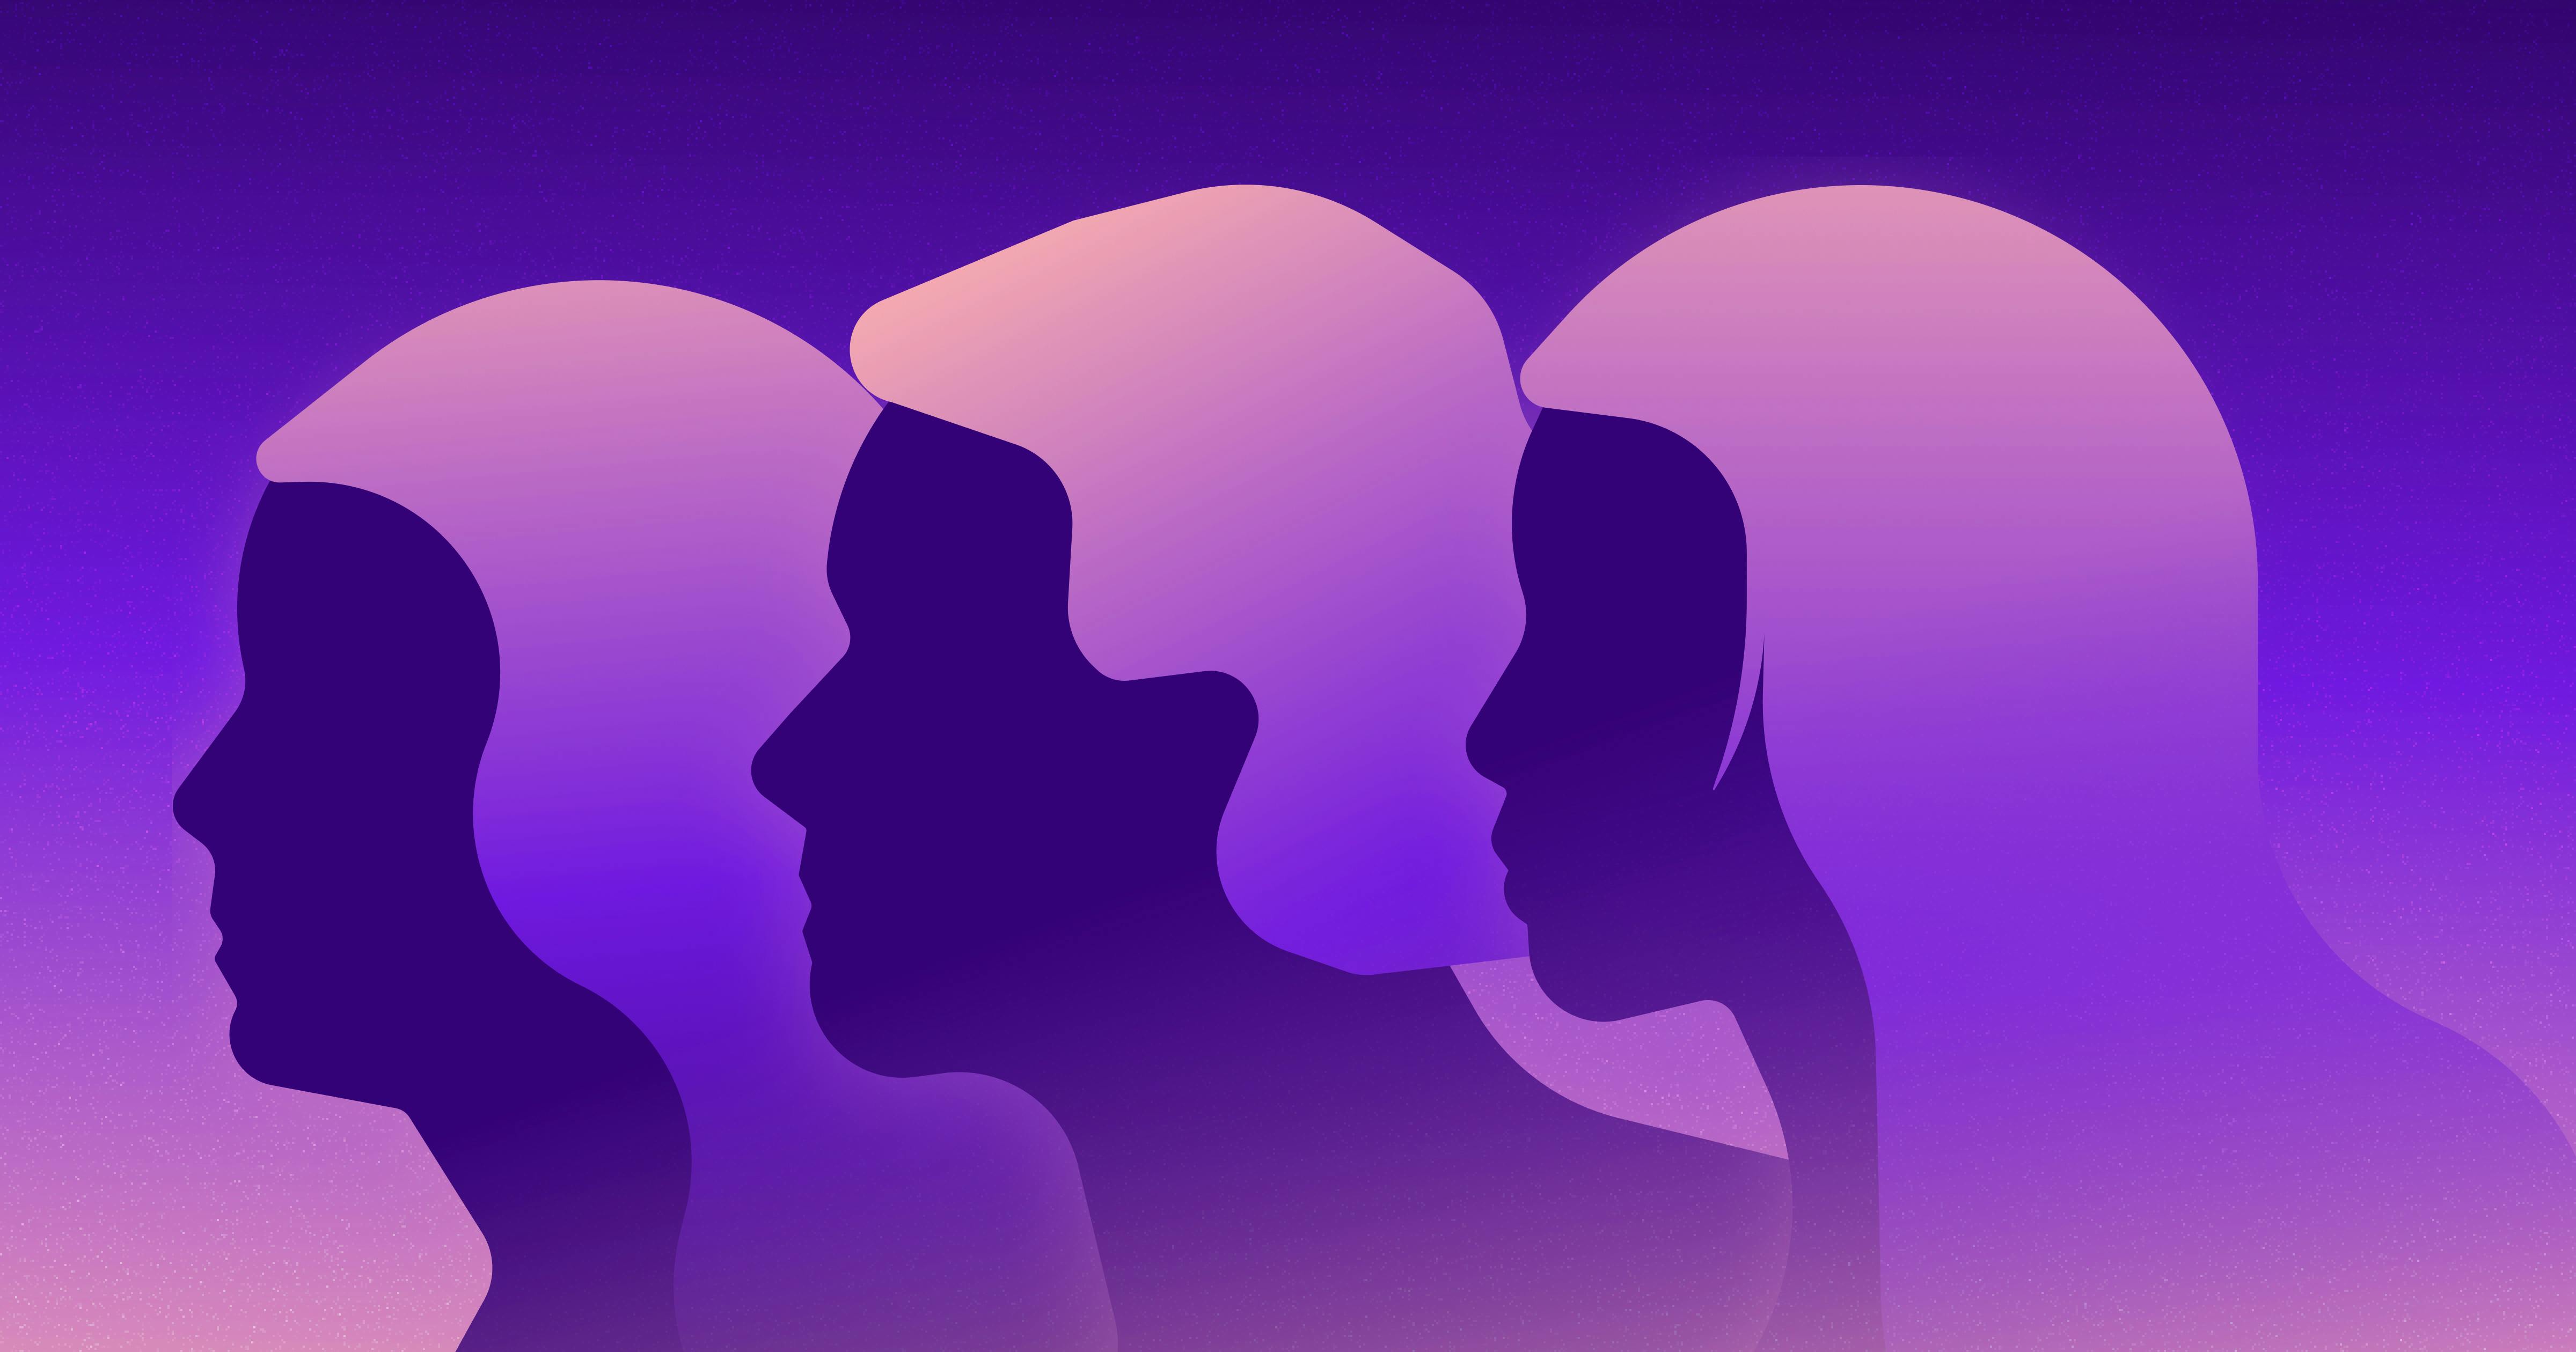 Purple and pink silhouettes of three women looking to the right.